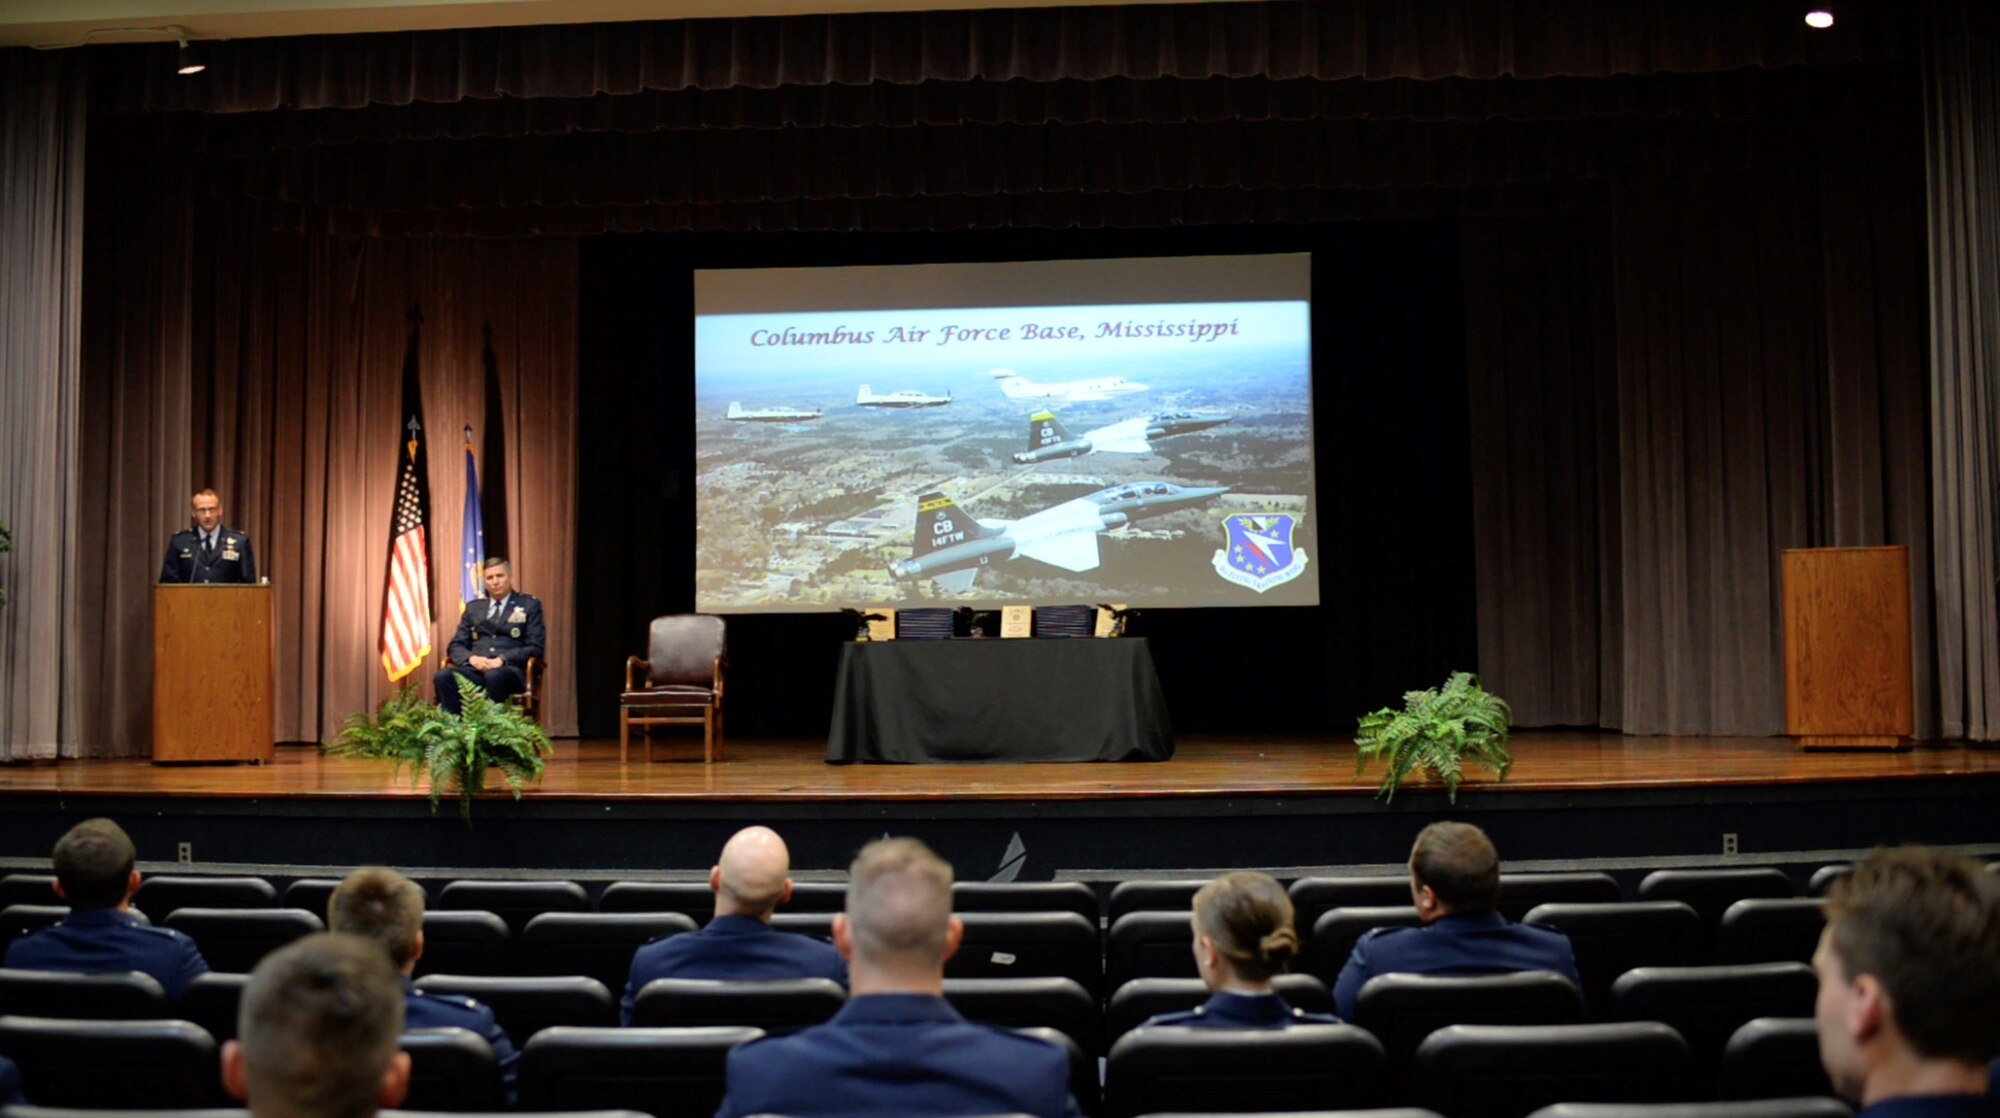 U.S. Air Force Col. Tom McElhinney III, 14th Operations Group commander, speaks at Specialized Undergraduate Pilot Training Class 20-18/19 graduation ceremony July 10, 2020, on Columbus Air Force Base, Miss. The 52-week pilot training program begins with a six-week preflight phase of academics and physiological training to prepare students for flight. (U.S. Air Force photo by Senior Airman Keith Holcomb)